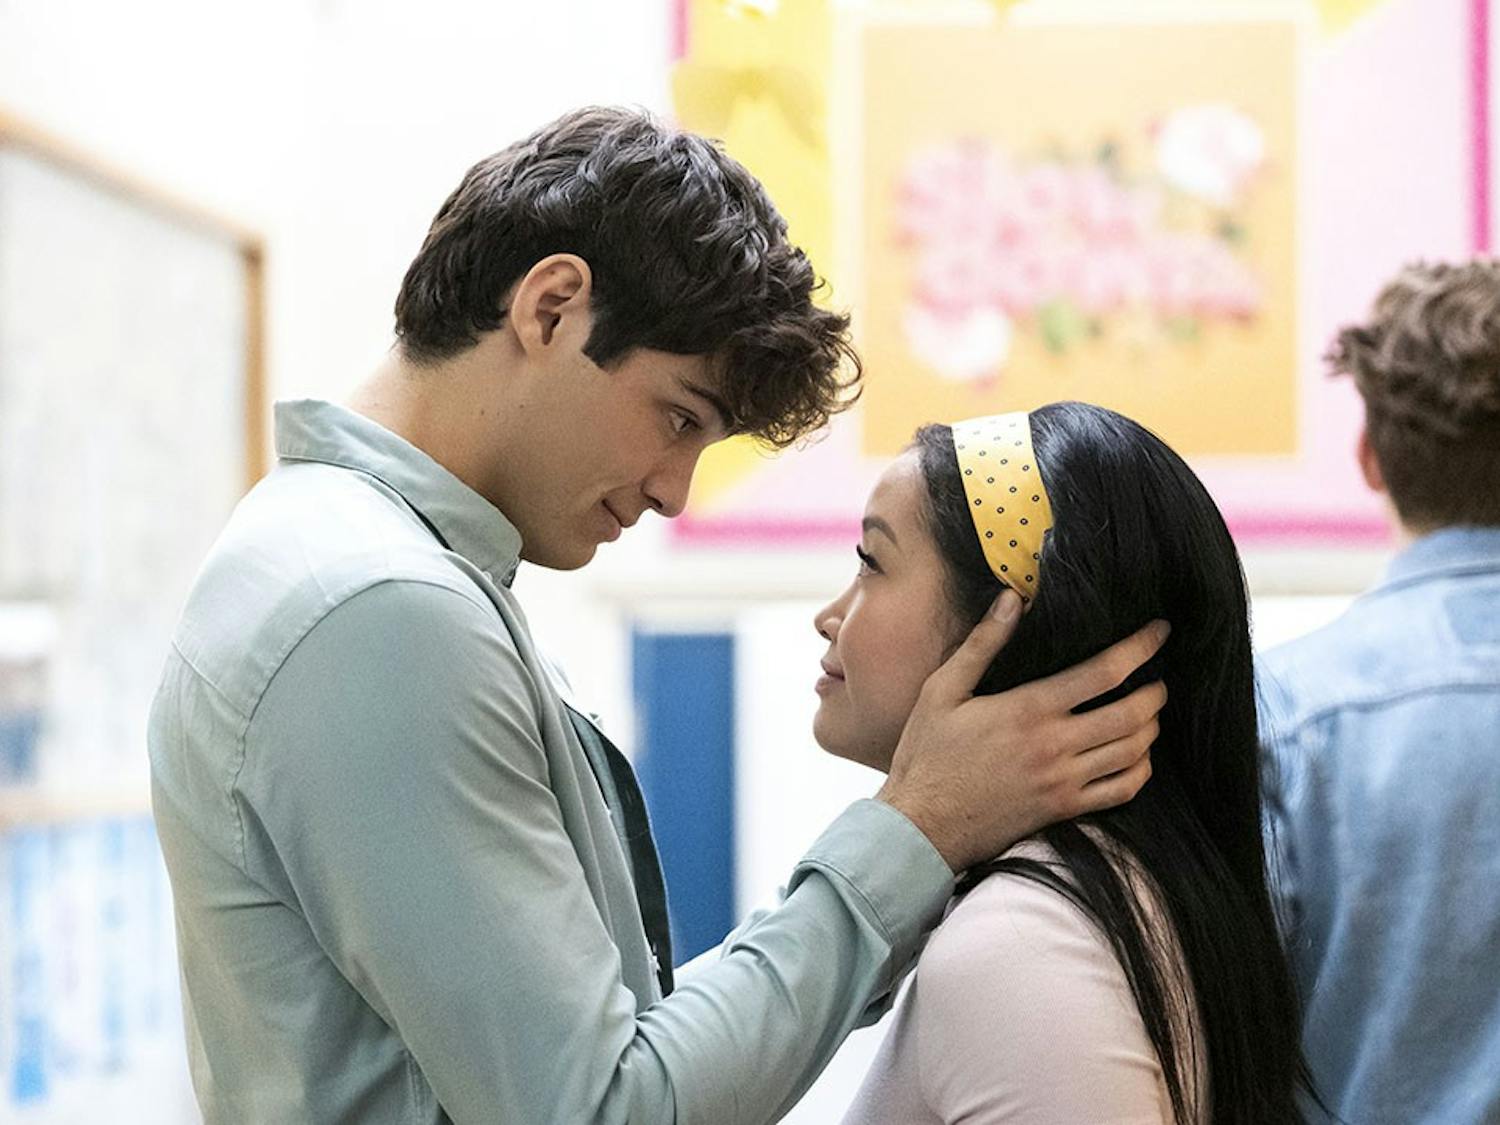 Noah Centineo and Lana Condor play main characters in the "To All the Boys I've Loved Before" Netflix movie series.&nbsp;